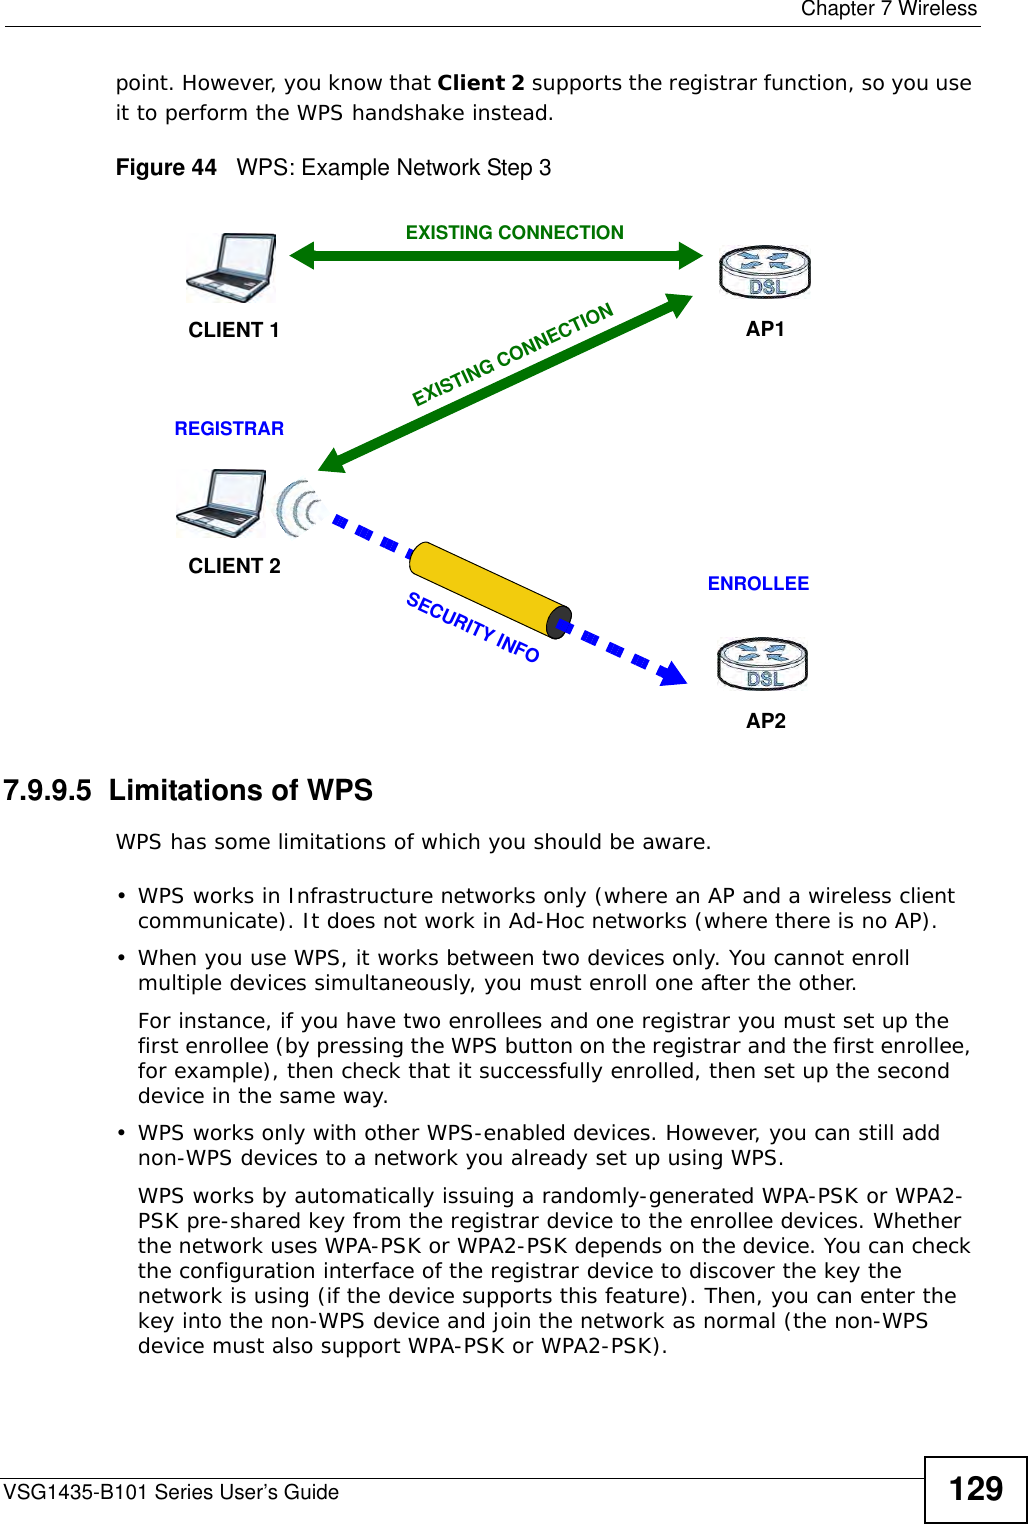  Chapter 7 WirelessVSG1435-B101 Series User’s Guide 129point. However, you know that Client 2 supports the registrar function, so you use it to perform the WPS handshake instead.Figure 44   WPS: Example Network Step 37.9.9.5  Limitations of WPSWPS has some limitations of which you should be aware. • WPS works in Infrastructure networks only (where an AP and a wireless client communicate). It does not work in Ad-Hoc networks (where there is no AP).• When you use WPS, it works between two devices only. You cannot enroll multiple devices simultaneously, you must enroll one after the other. For instance, if you have two enrollees and one registrar you must set up the first enrollee (by pressing the WPS button on the registrar and the first enrollee, for example), then check that it successfully enrolled, then set up the second device in the same way.• WPS works only with other WPS-enabled devices. However, you can still add non-WPS devices to a network you already set up using WPS. WPS works by automatically issuing a randomly-generated WPA-PSK or WPA2-PSK pre-shared key from the registrar device to the enrollee devices. Whether the network uses WPA-PSK or WPA2-PSK depends on the device. You can check the configuration interface of the registrar device to discover the key the network is using (if the device supports this feature). Then, you can enter the key into the non-WPS device and join the network as normal (the non-WPS device must also support WPA-PSK or WPA2-PSK).CLIENT 1 AP1REGISTRARCLIENT 2EXISTING CONNECTIONSECURITY INFOENROLLEEAP2EXISTING CONNECTION